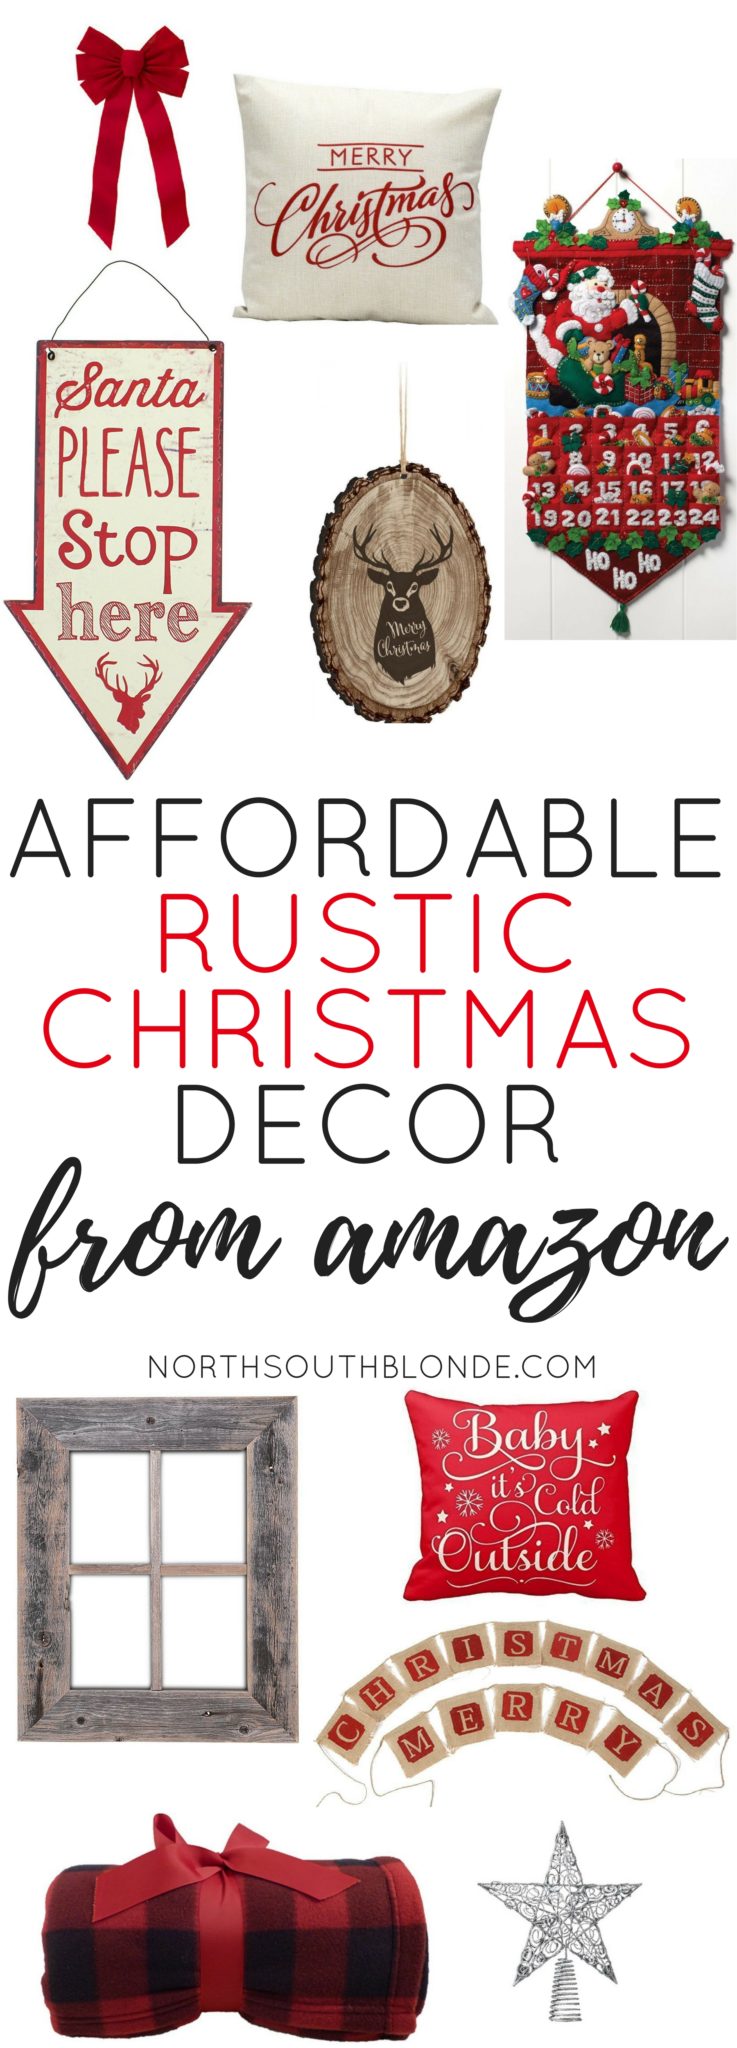 Affordable Rustic Christmas Decor from Amazon